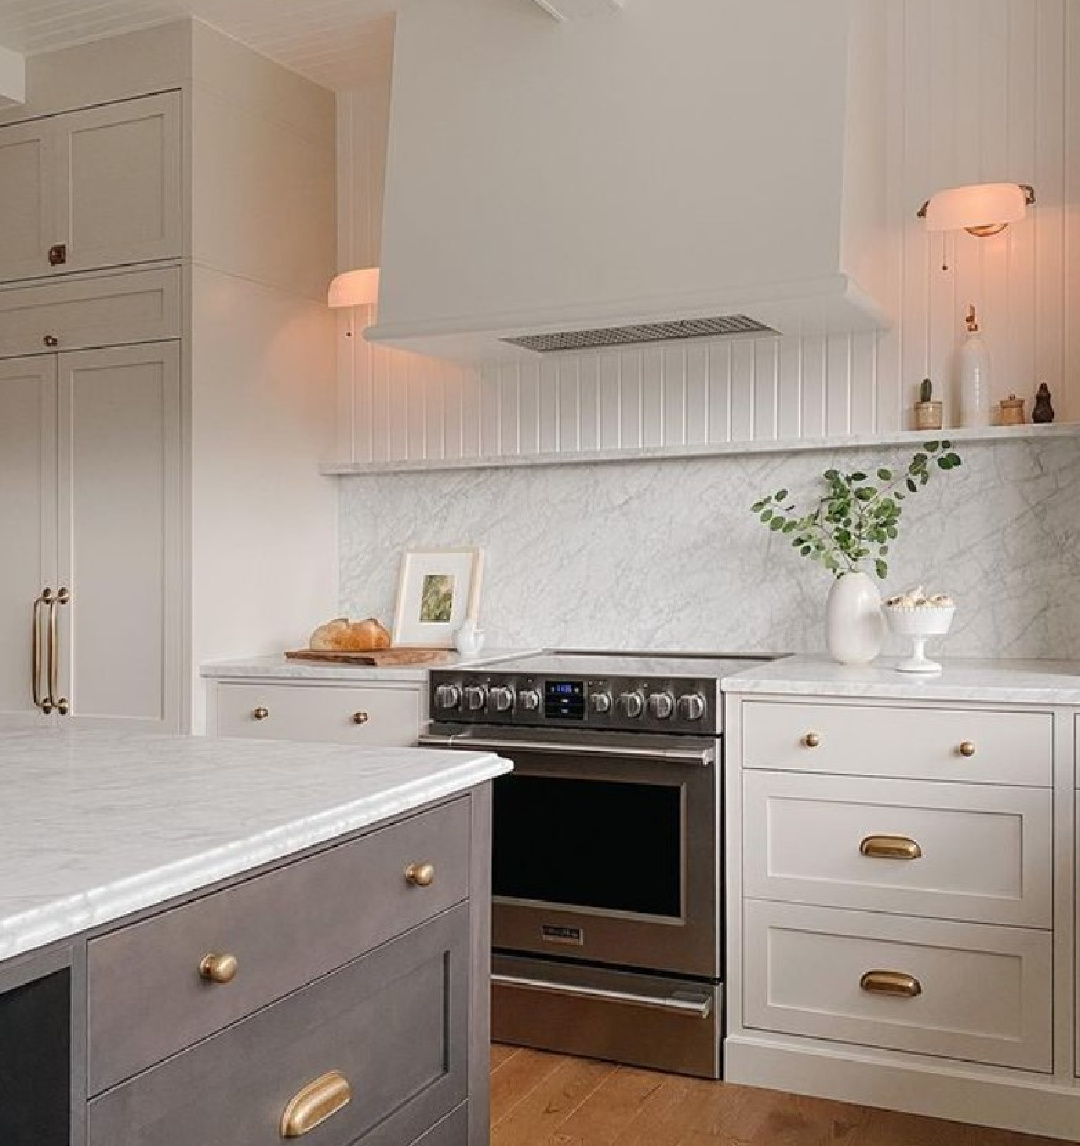 BM Collingwood on kitchen cabinets in a beautiful white kitchen with Chantilly Lace walls - design by AKBDesign. #collingwood #bmcollingwood #chantillylace